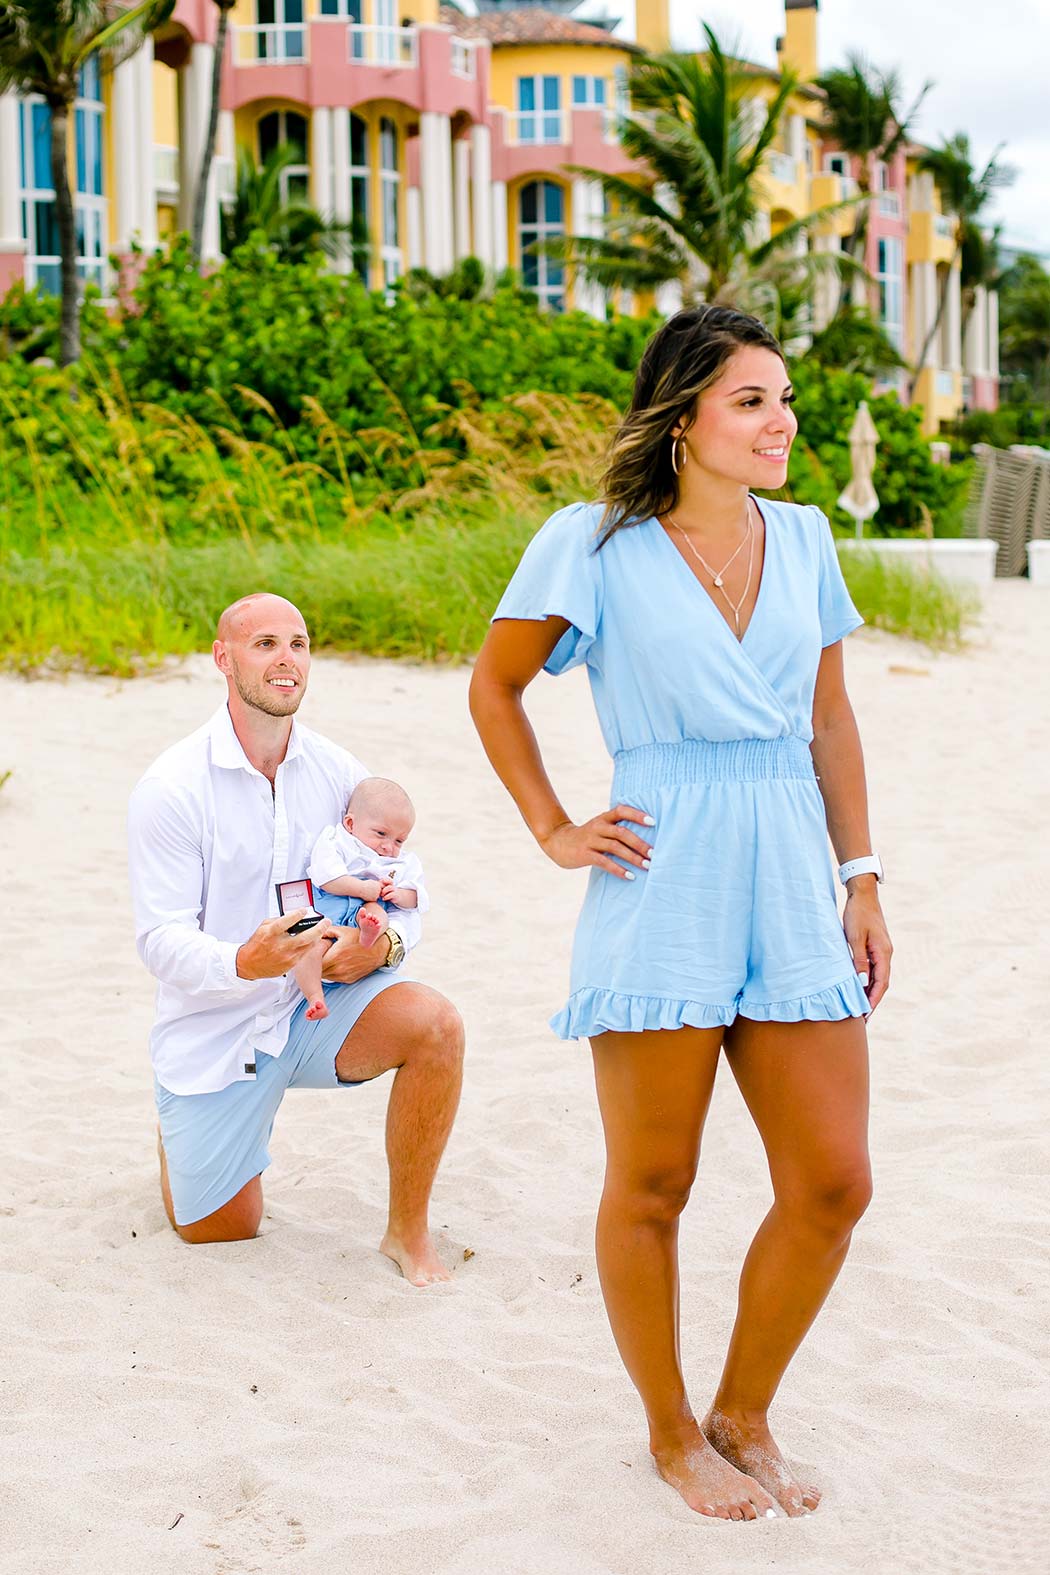 adorable beach proposal in fort lauderdale with baby| fort lauderdale engagement photographer | fort lauderdale beach surprise proposal with baby